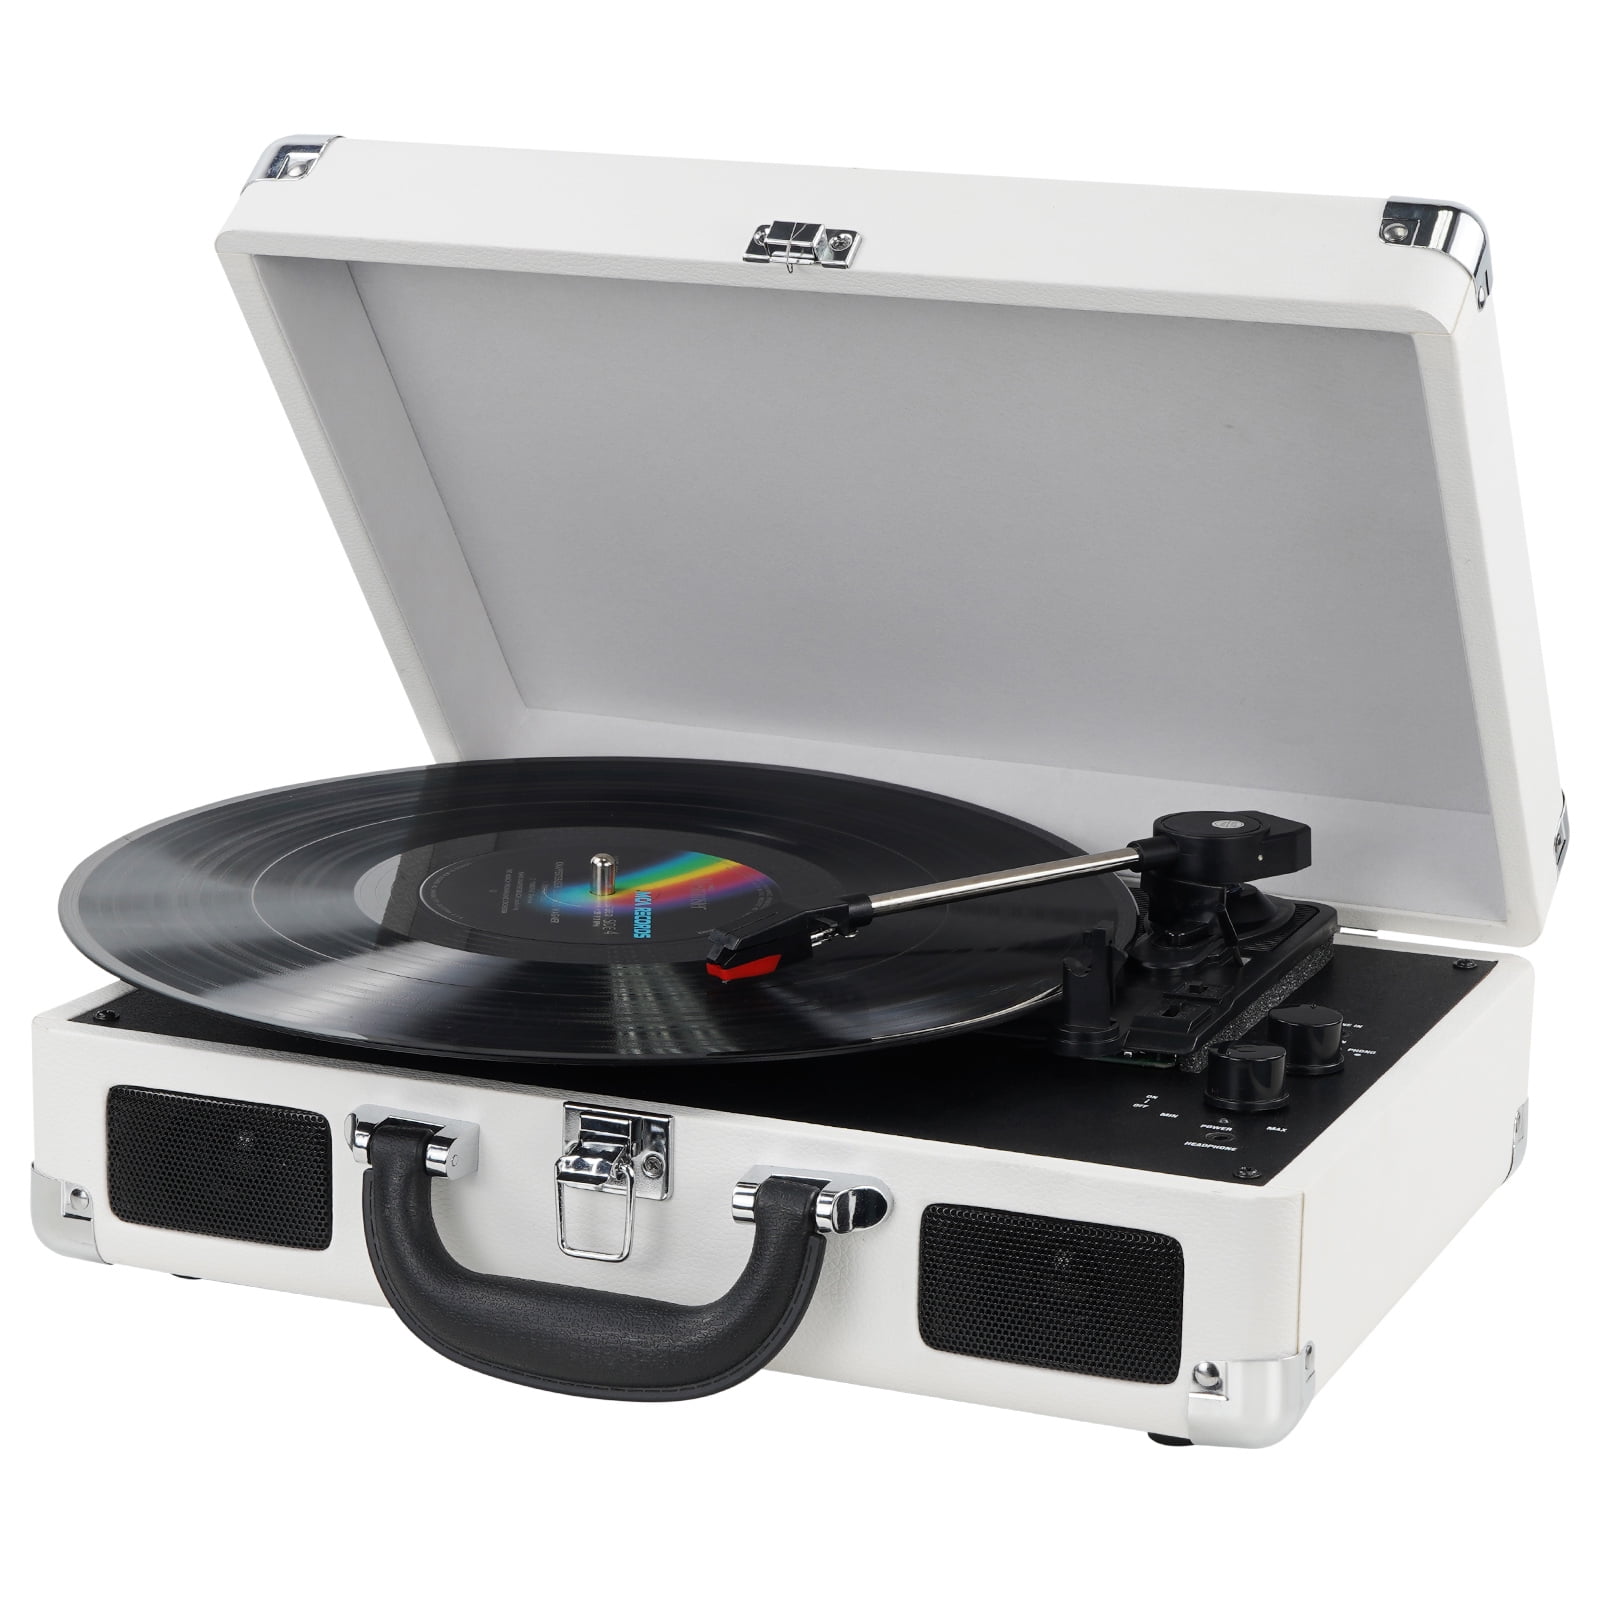 DIGITNOW Vinyl Record Player 3 Speeds with Built-in Stereo